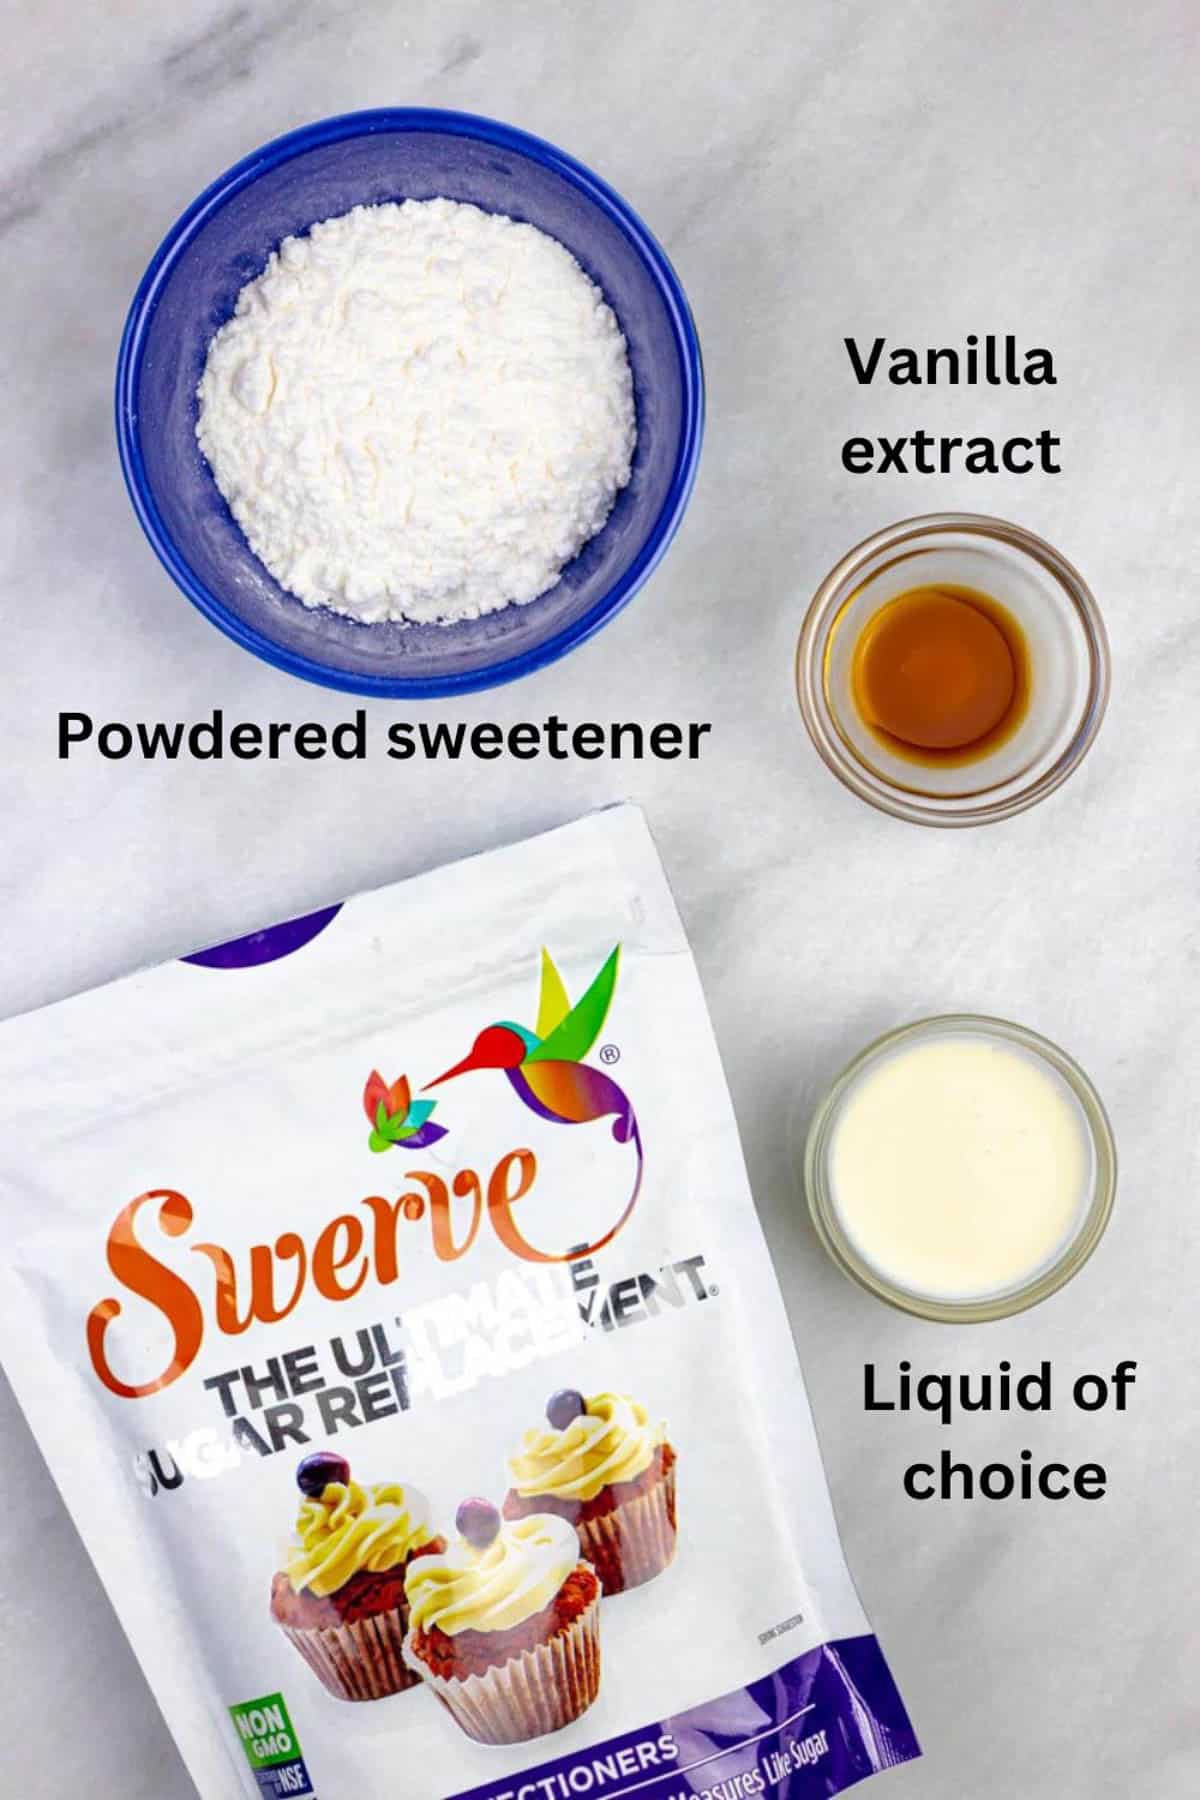 Ingredients with text labels for sugar-free glaze icing.